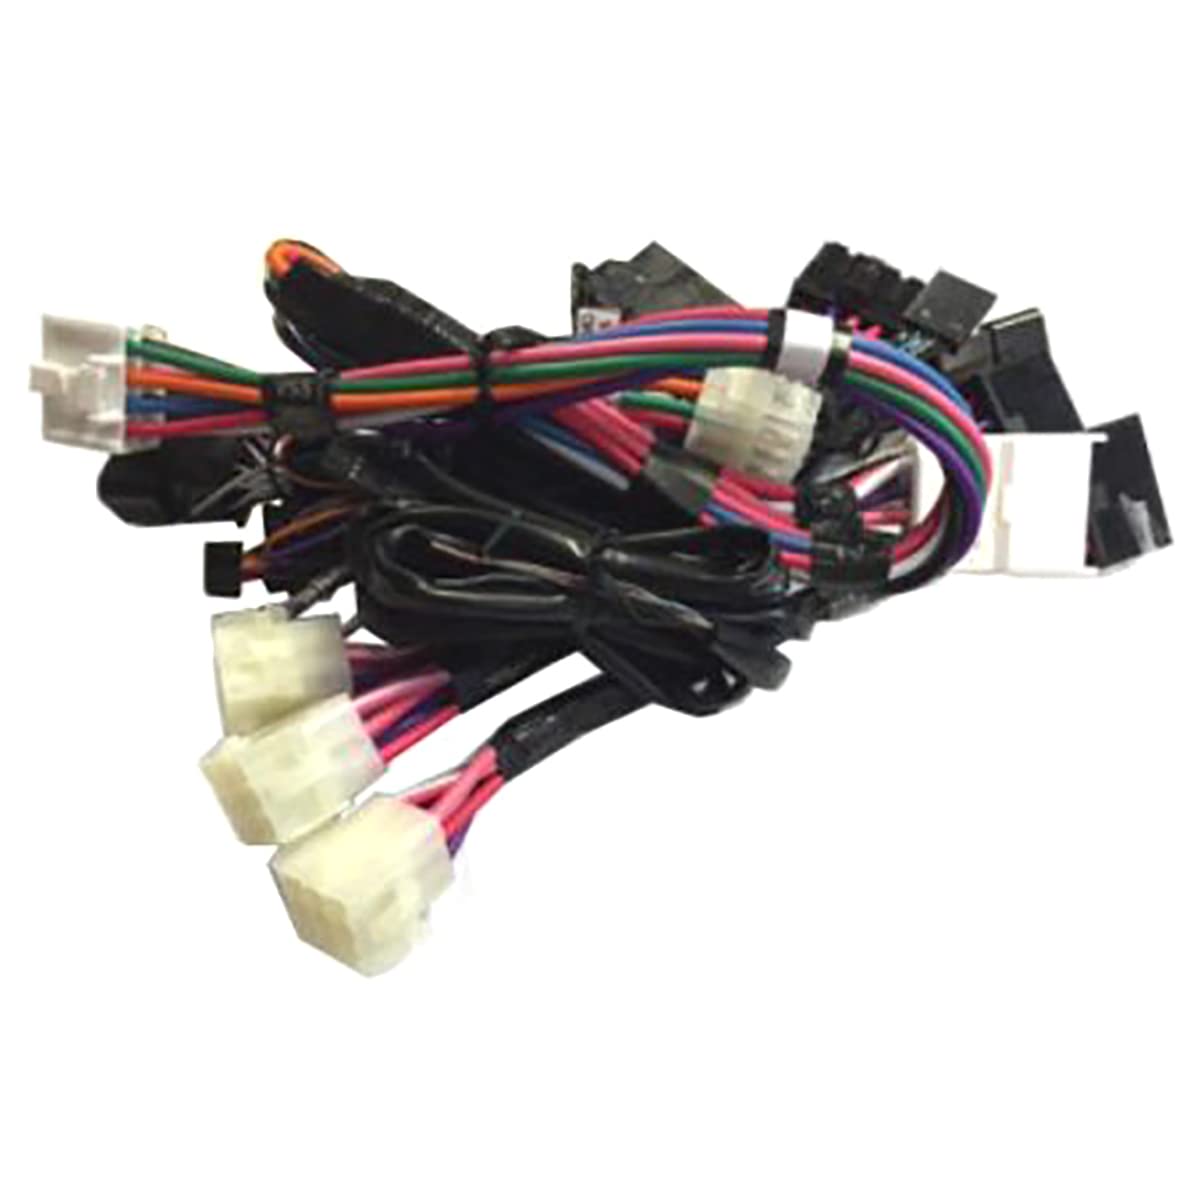 iDatastart ADS-THR-TL7 Remote start T-harness for select 2010-up Toyota and Lexus vehicles with push-to-start ignition (CMHCXA0 module also required)